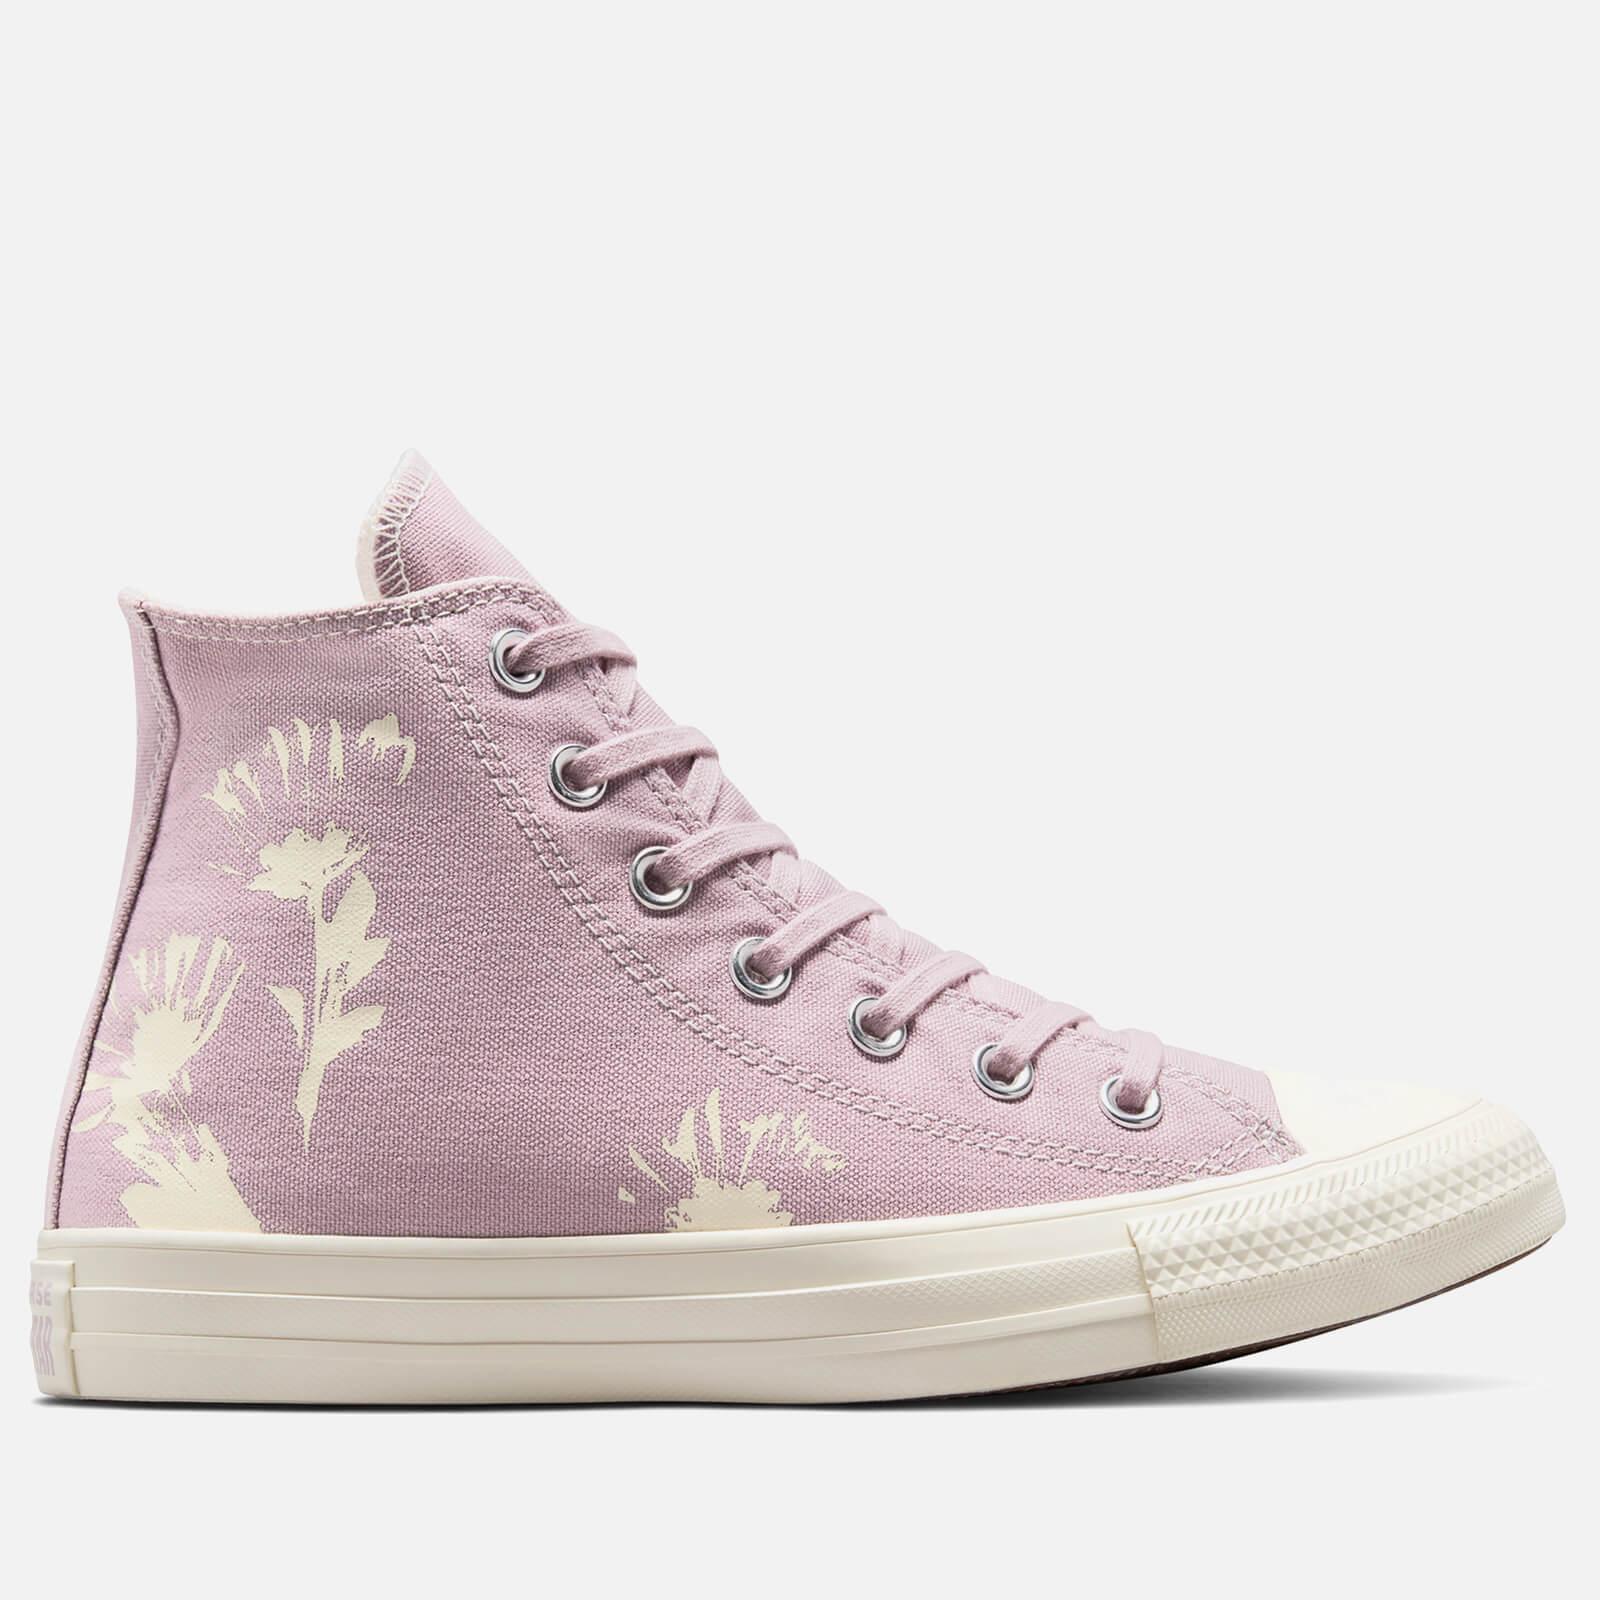 Converse Chuck Taylor All Star Hybrid Floral Hi-top Trainers in Pink Lyst